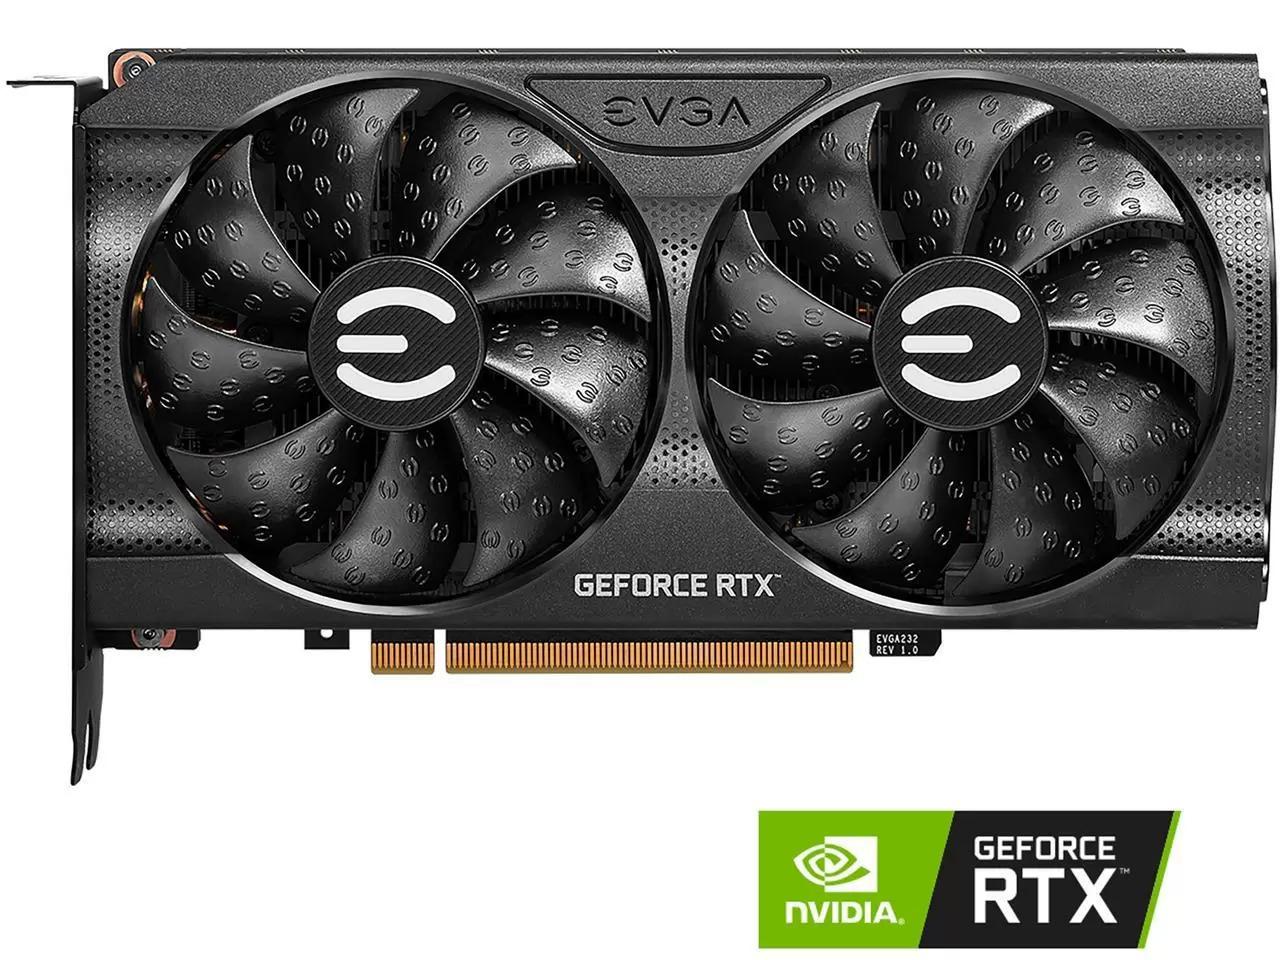 EVGA GeForce RTX 3060 XC GAMING 12GB GDDR6 Graphics Card for $279.99 Shipped